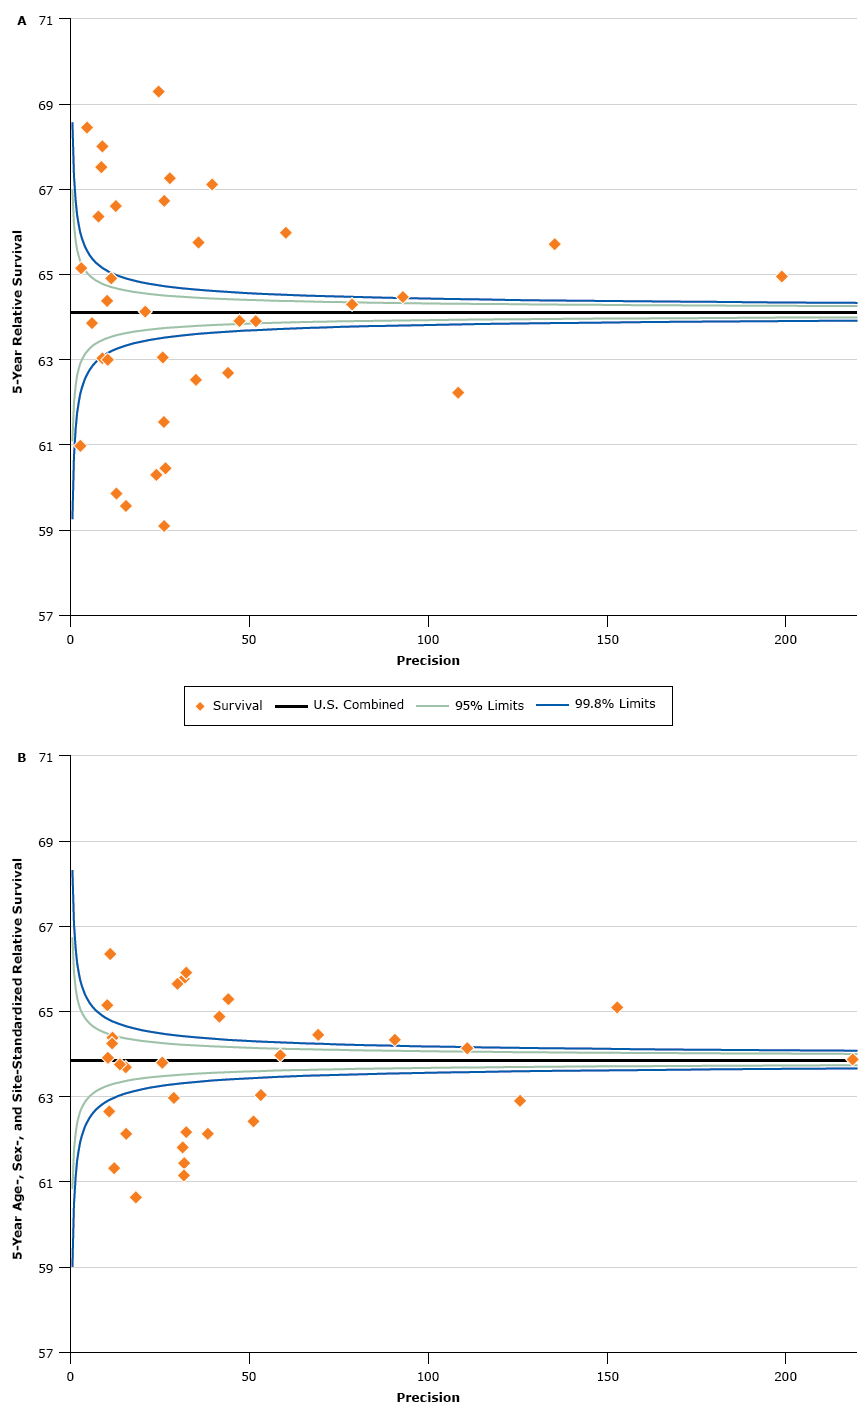 Graph a shows a funnel plot of 5-year age-standardized relative survival ratios for all cancer sites combined for men and women diagnosed with cancer from 2006 through 2012 and followed up on December 31, 2012. Graph b shows a funnel plot of 5-year age-, sex-, and site-standardized relative survival ratios, calculated by using the North American Cancer Survival Index (CSI), for men and women diagnosed with cancer from 2006 through 2012 and followed up on December 31, 2012. Graphs a and b show funnel plots of 5-year relative survival plotted against precision, such that low-precision estimates are on the left side, and high-precision estimates are on the right side. Precision was calculated as the inverse of the variance of the survival estimates. The control limits were established by using the range of standard errors from the registry-specific survival estimates and are shown as the lower and upper percentile limits of the standard Normal distribution (z = 1.96 for 95% control limits and z = 3.09 for 99.8% control limits) around US combined estimates. Graph a shows the dramatic variation in estimates of relative survival by registry jurisdiction for all sites combined. Graph b shows substantially less variation using the CSI, which is standardized by age, sex, and cancer-site mix, than in using the all sites combined statistics set. The survival estimates in graph b are overall much closer to the line for the United States combined. The figures are a graphic representation of the data in Table 2 that use a function of the standard error for precision.